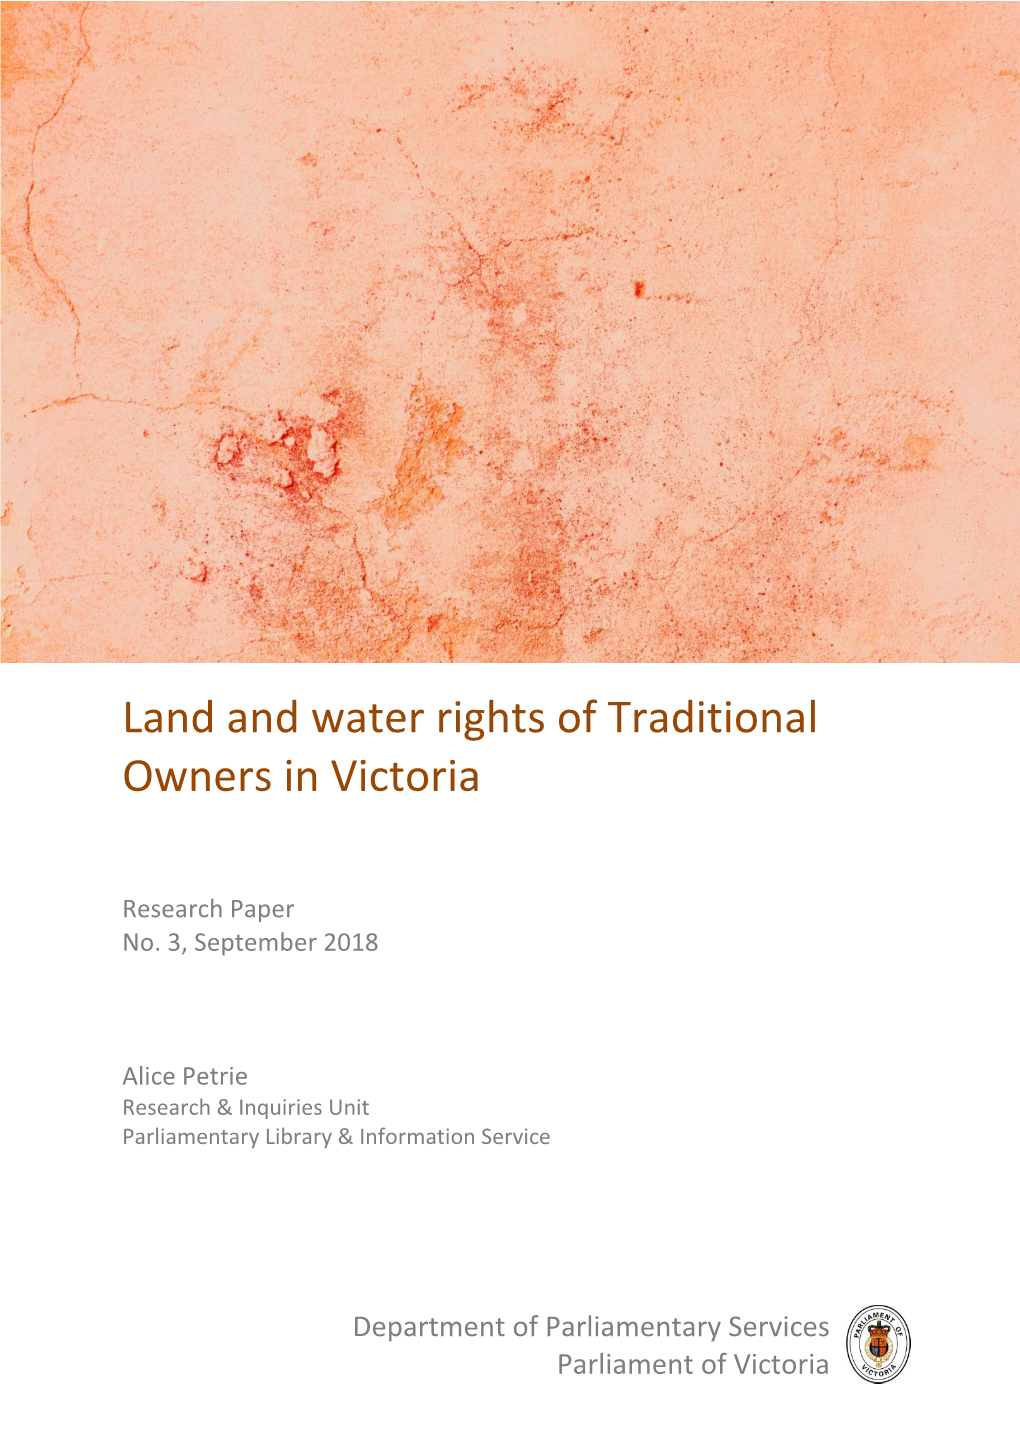 Land and Water Rights of Traditional Owners in Victoria